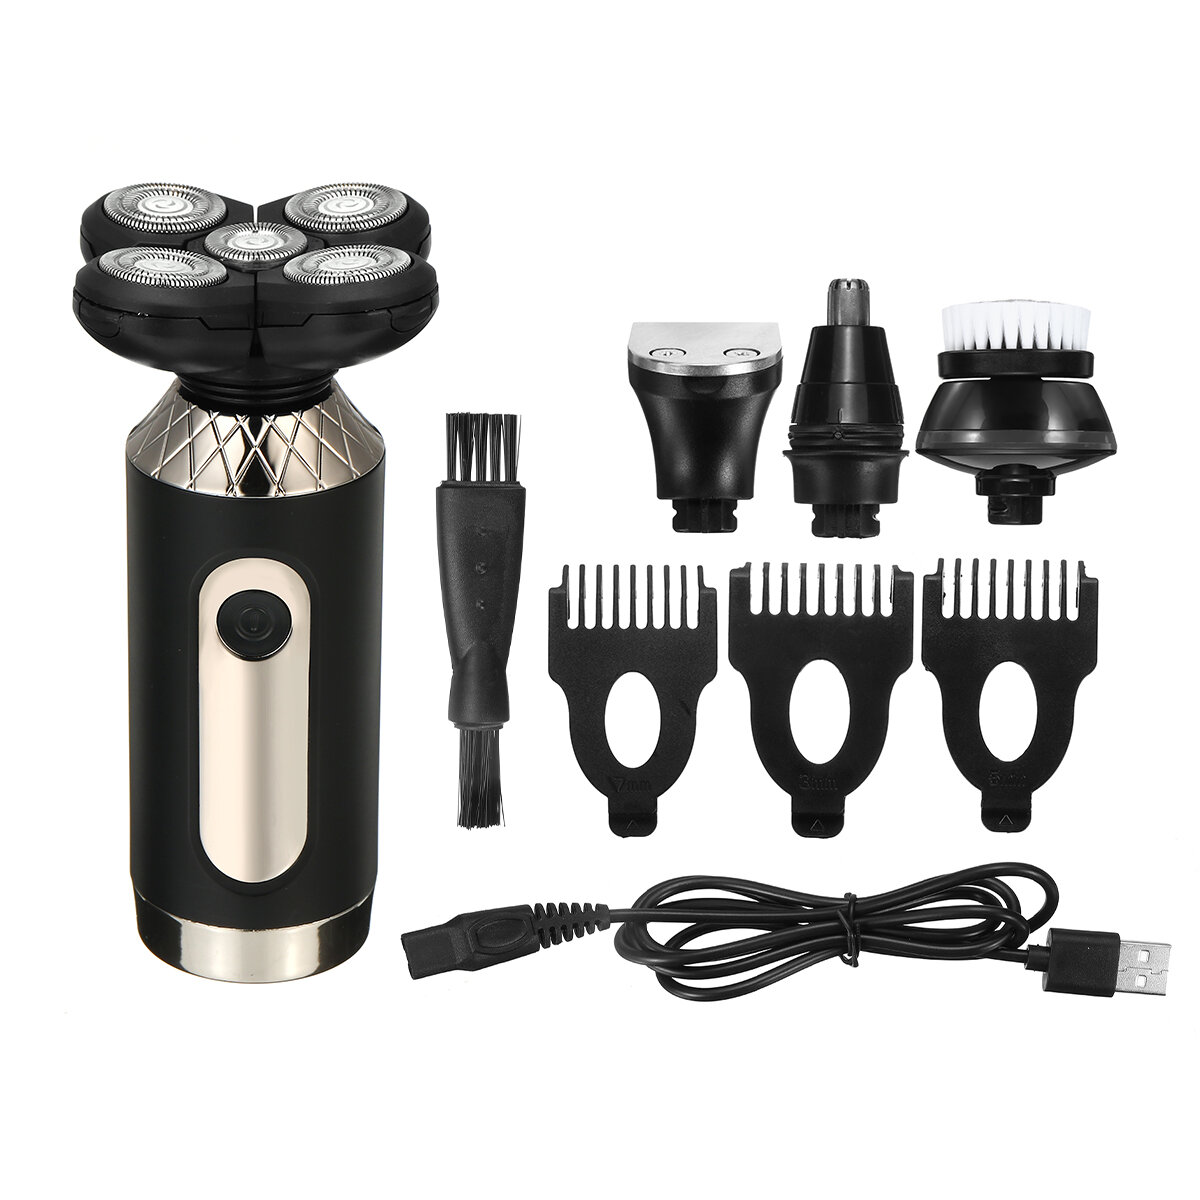 

9-in-1 Multifunctional Electric Shaver IPX7 Waterproof Razor Rechargeable Men's Cleaner Hair Nose Trimmer